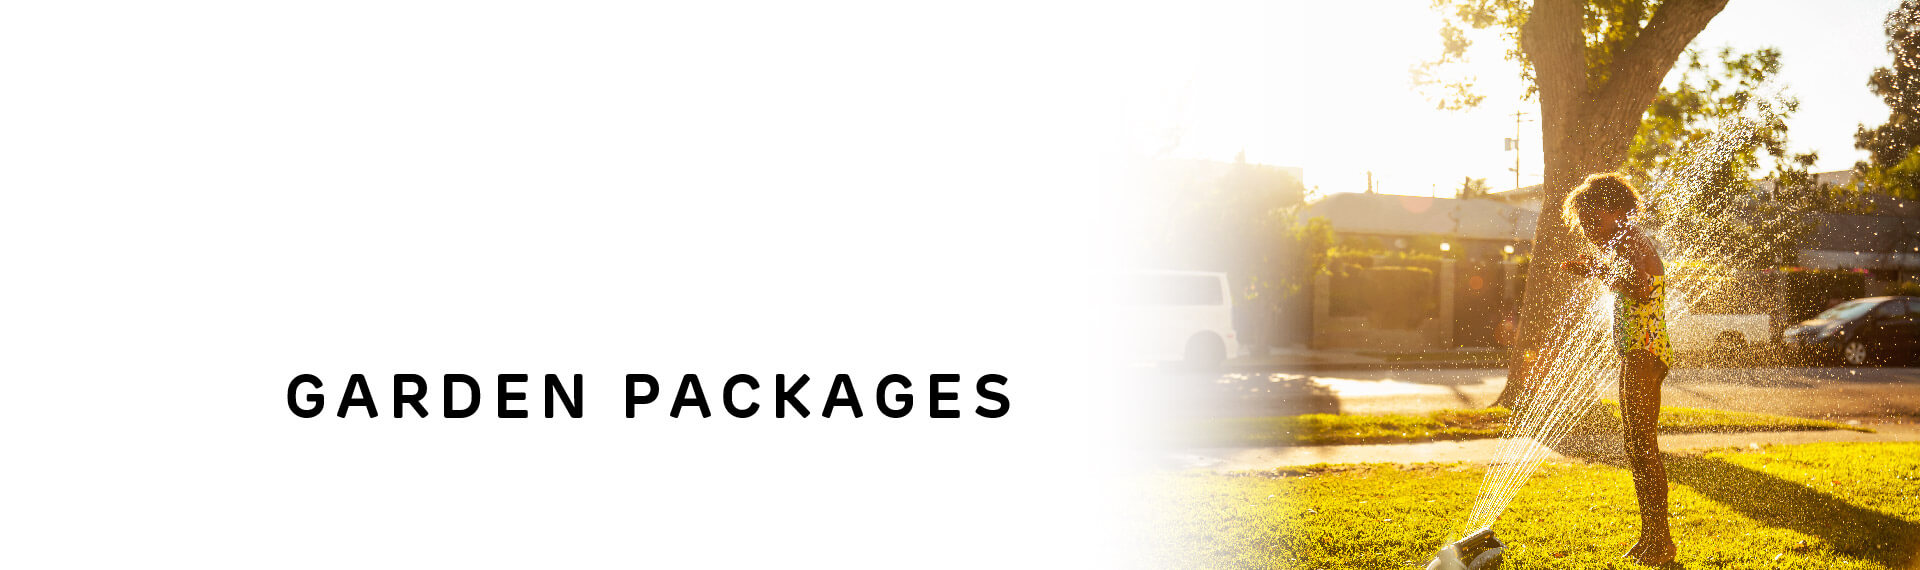 Header image with “Garden Packages” in capital letters; with a photo of a child playing in the sprinklers.